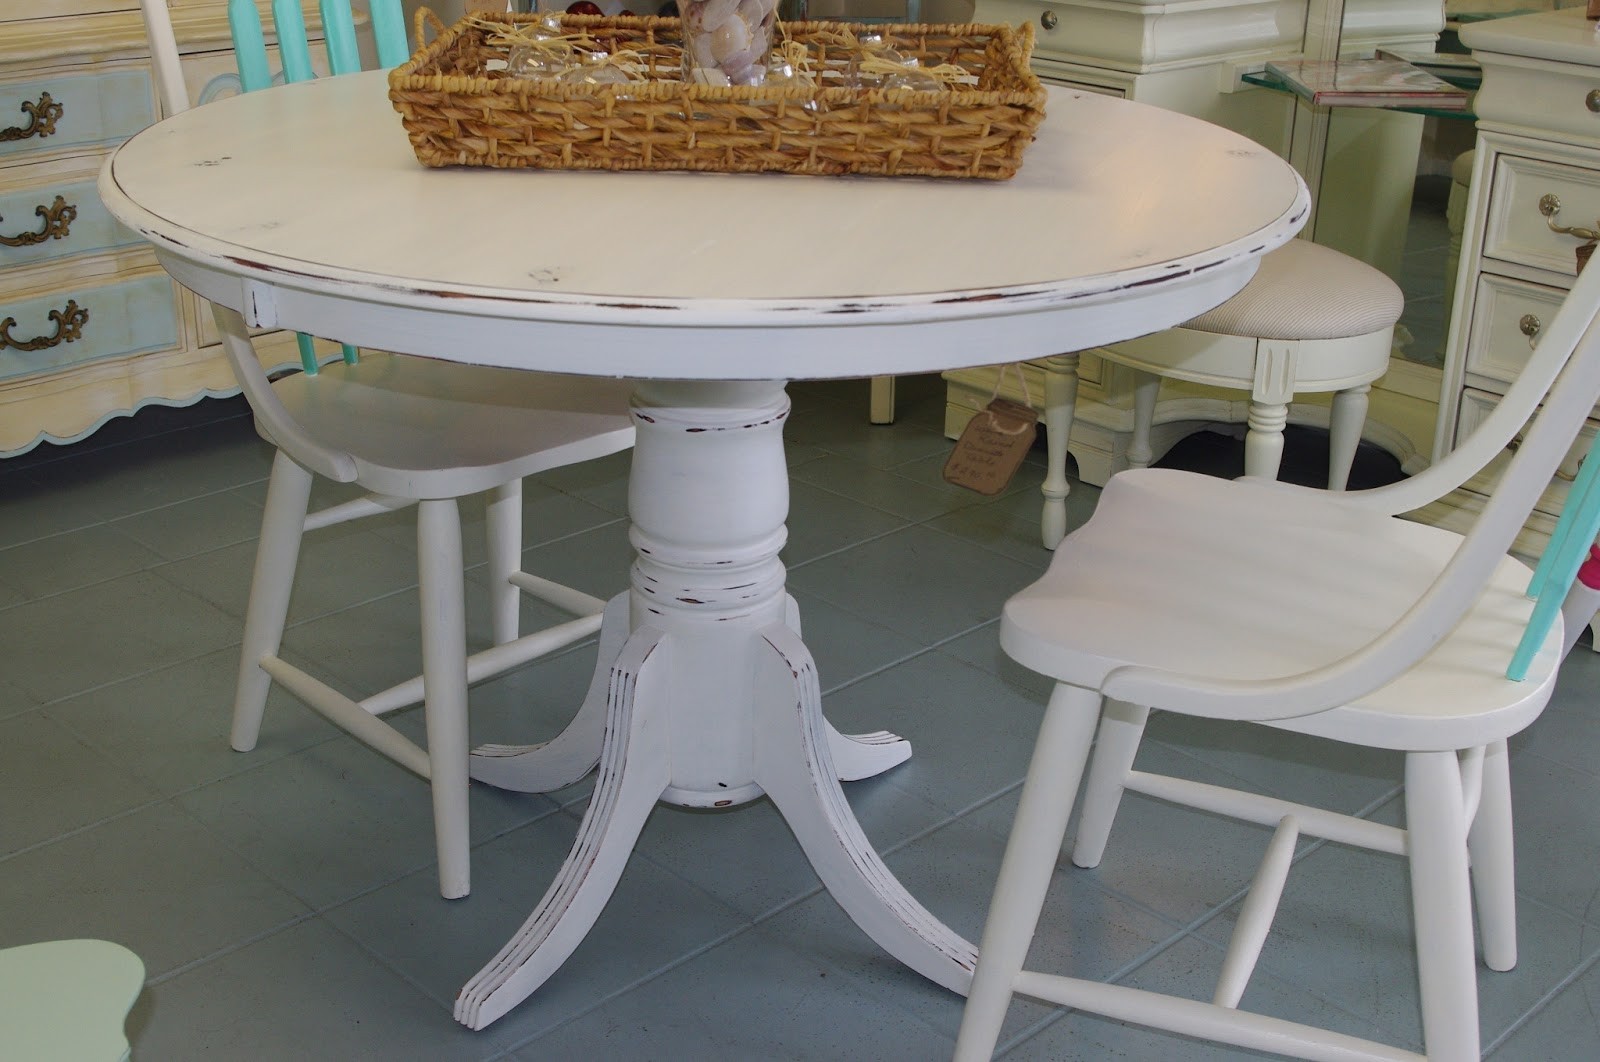 Coastal chic boutique distressed white round dining table